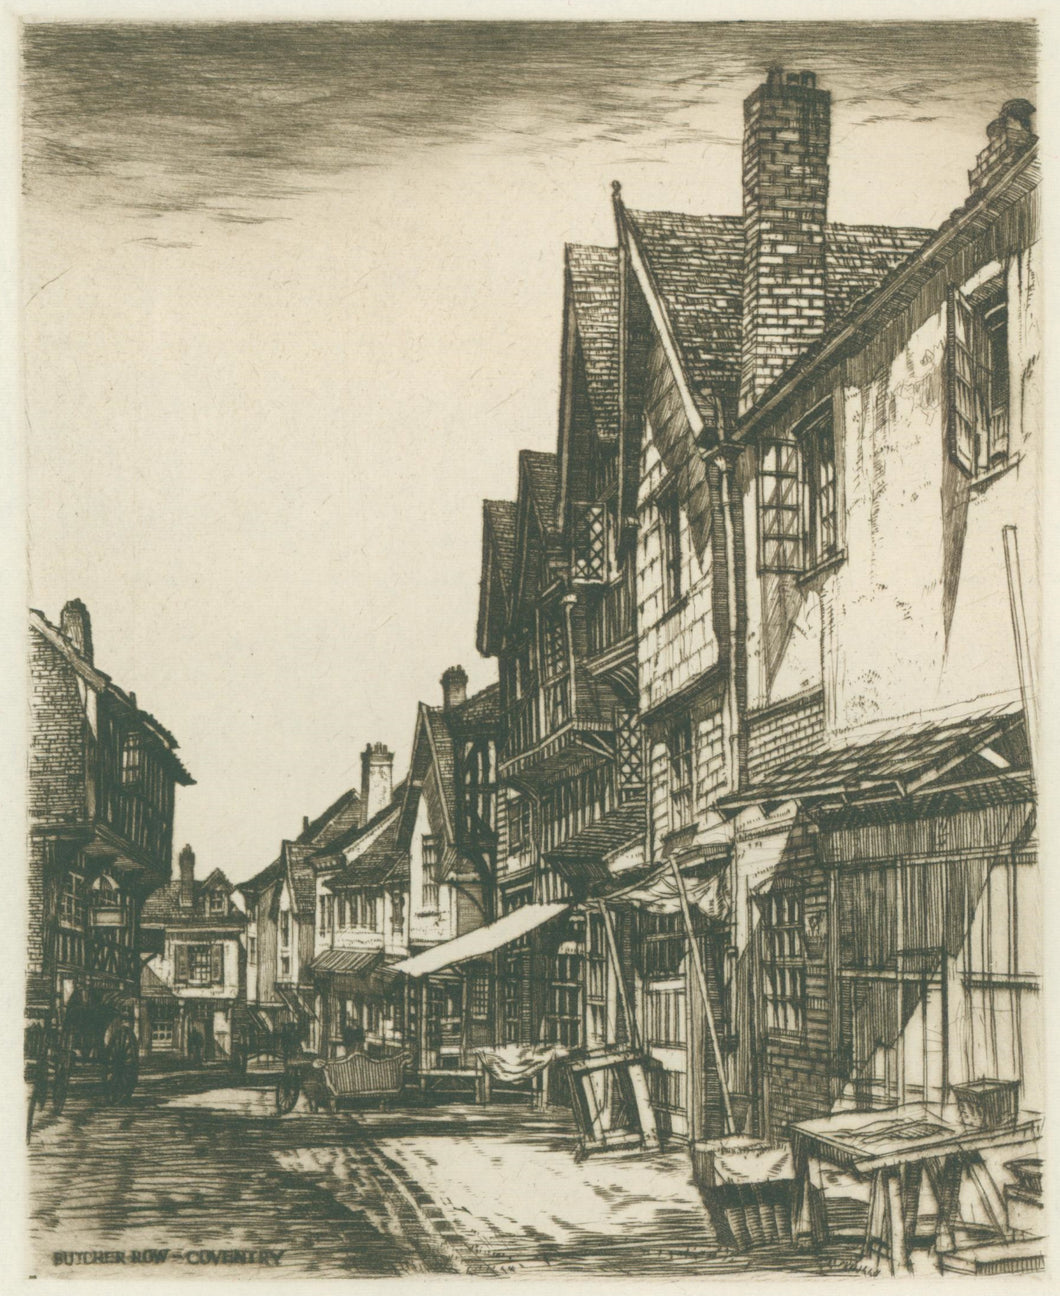 Unattributed  “Butchers Row-Coventry.”  [England]